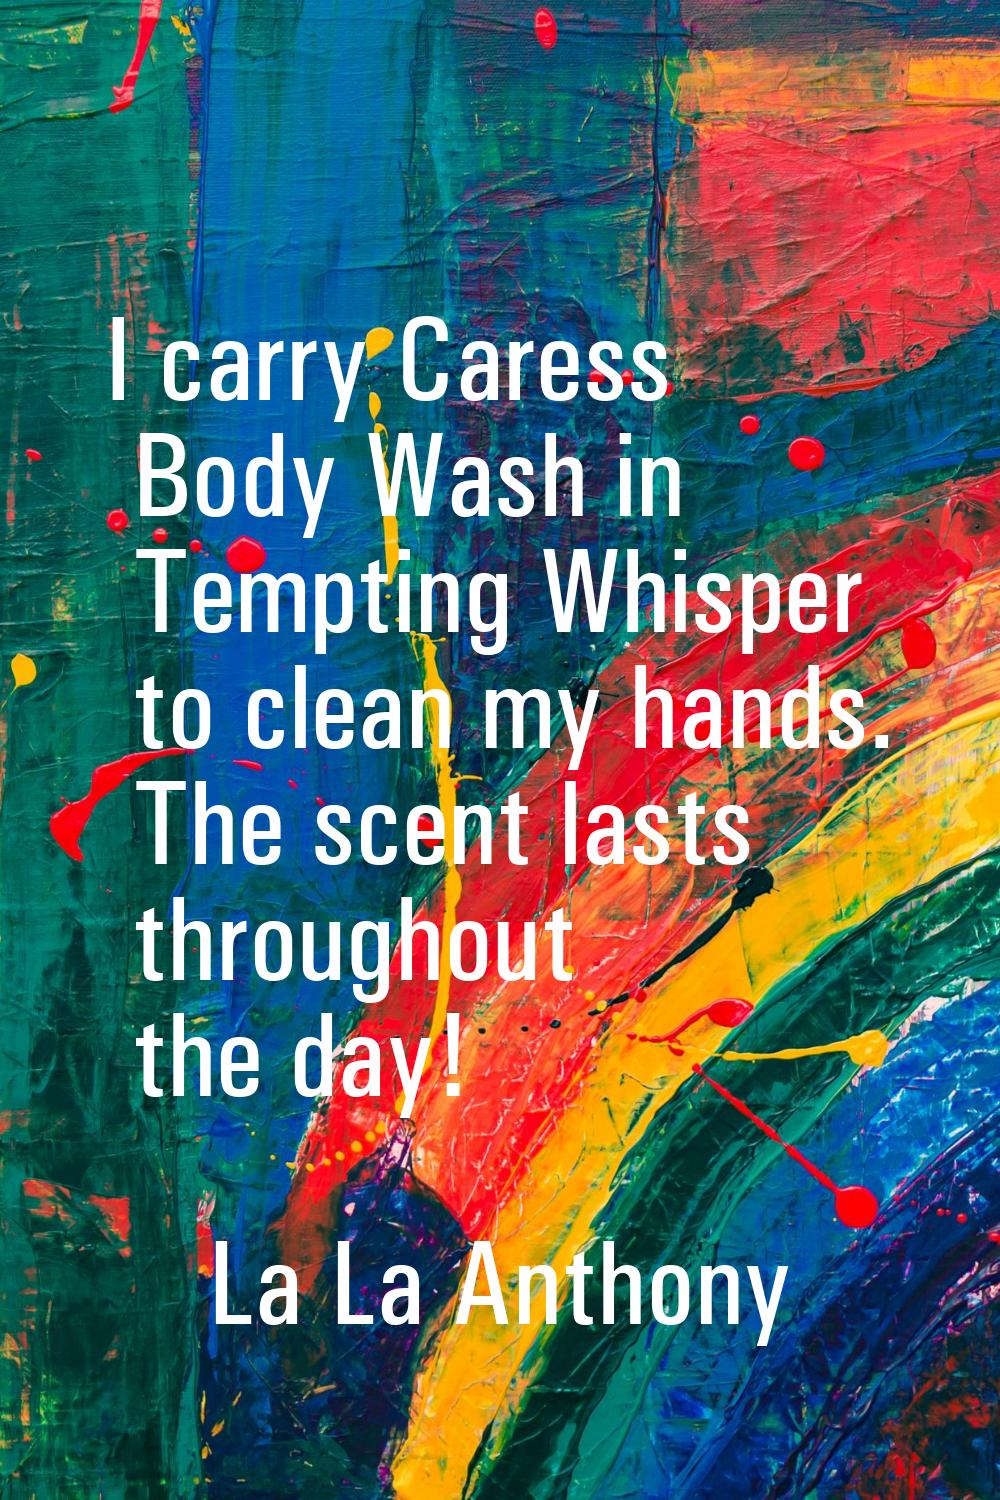 I carry Caress Body Wash in Tempting Whisper to clean my hands. The scent lasts throughout the day!